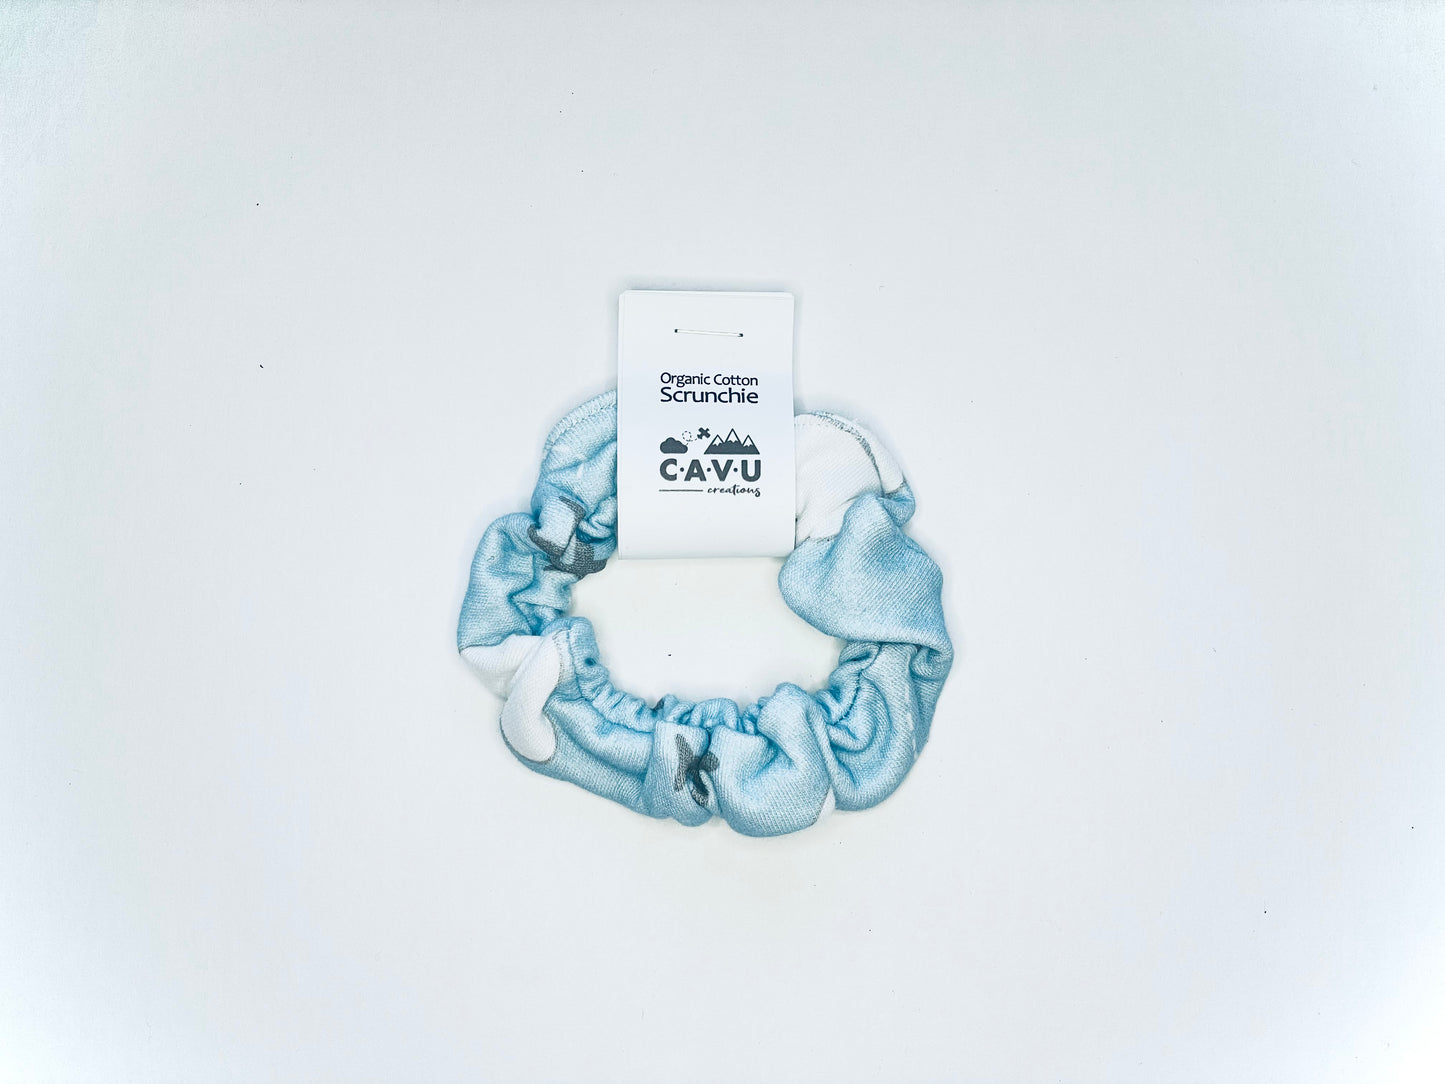 Organic Cotton Scrunchie - Jets in Clouds - Blue / Gray / White